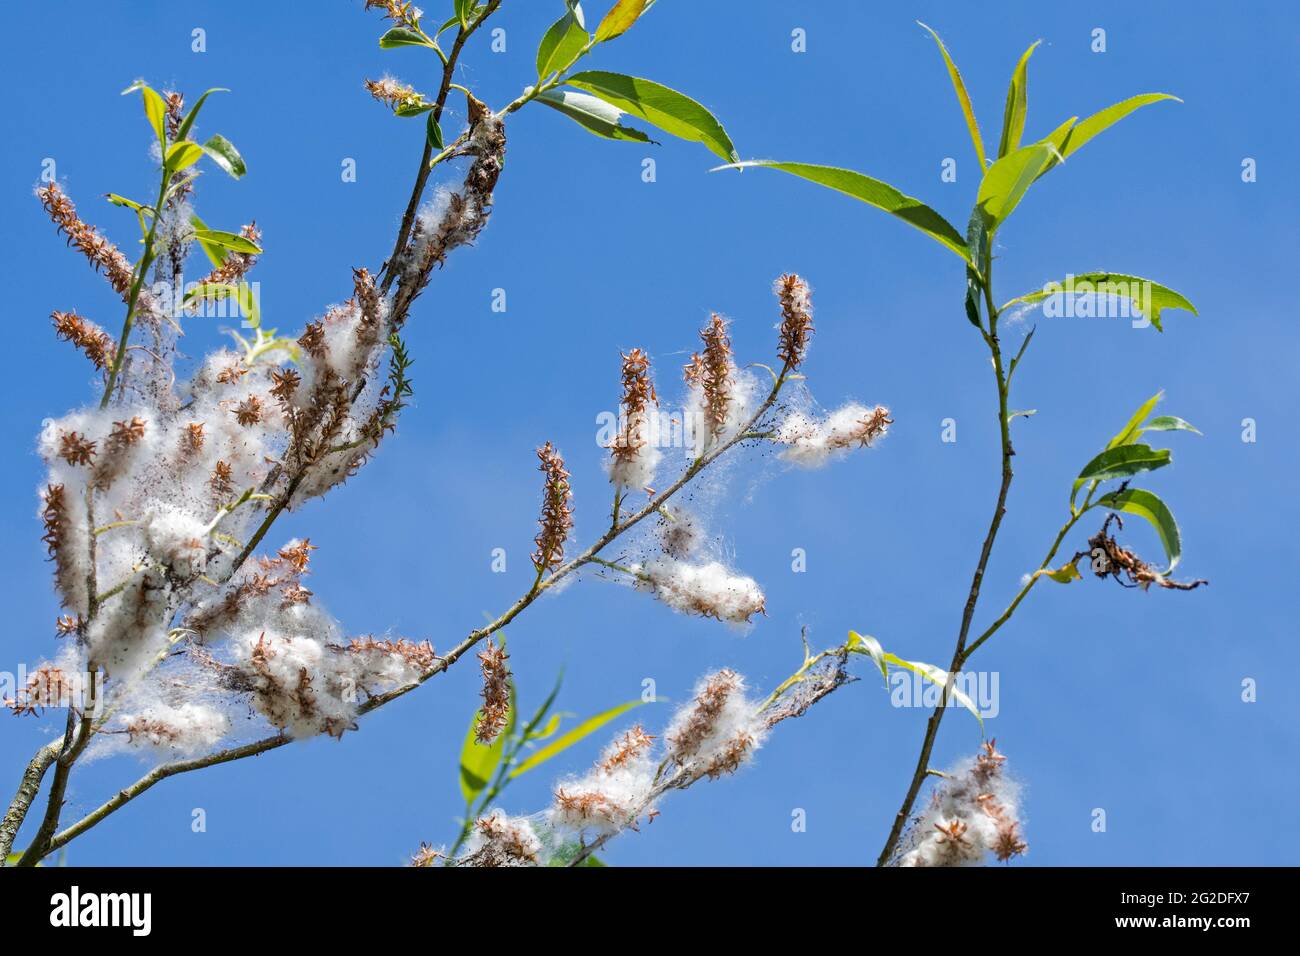 White willow (Salix alba) showing leaves and female catkins producing seeds embedded in white down / fluff in spring Stock Photo